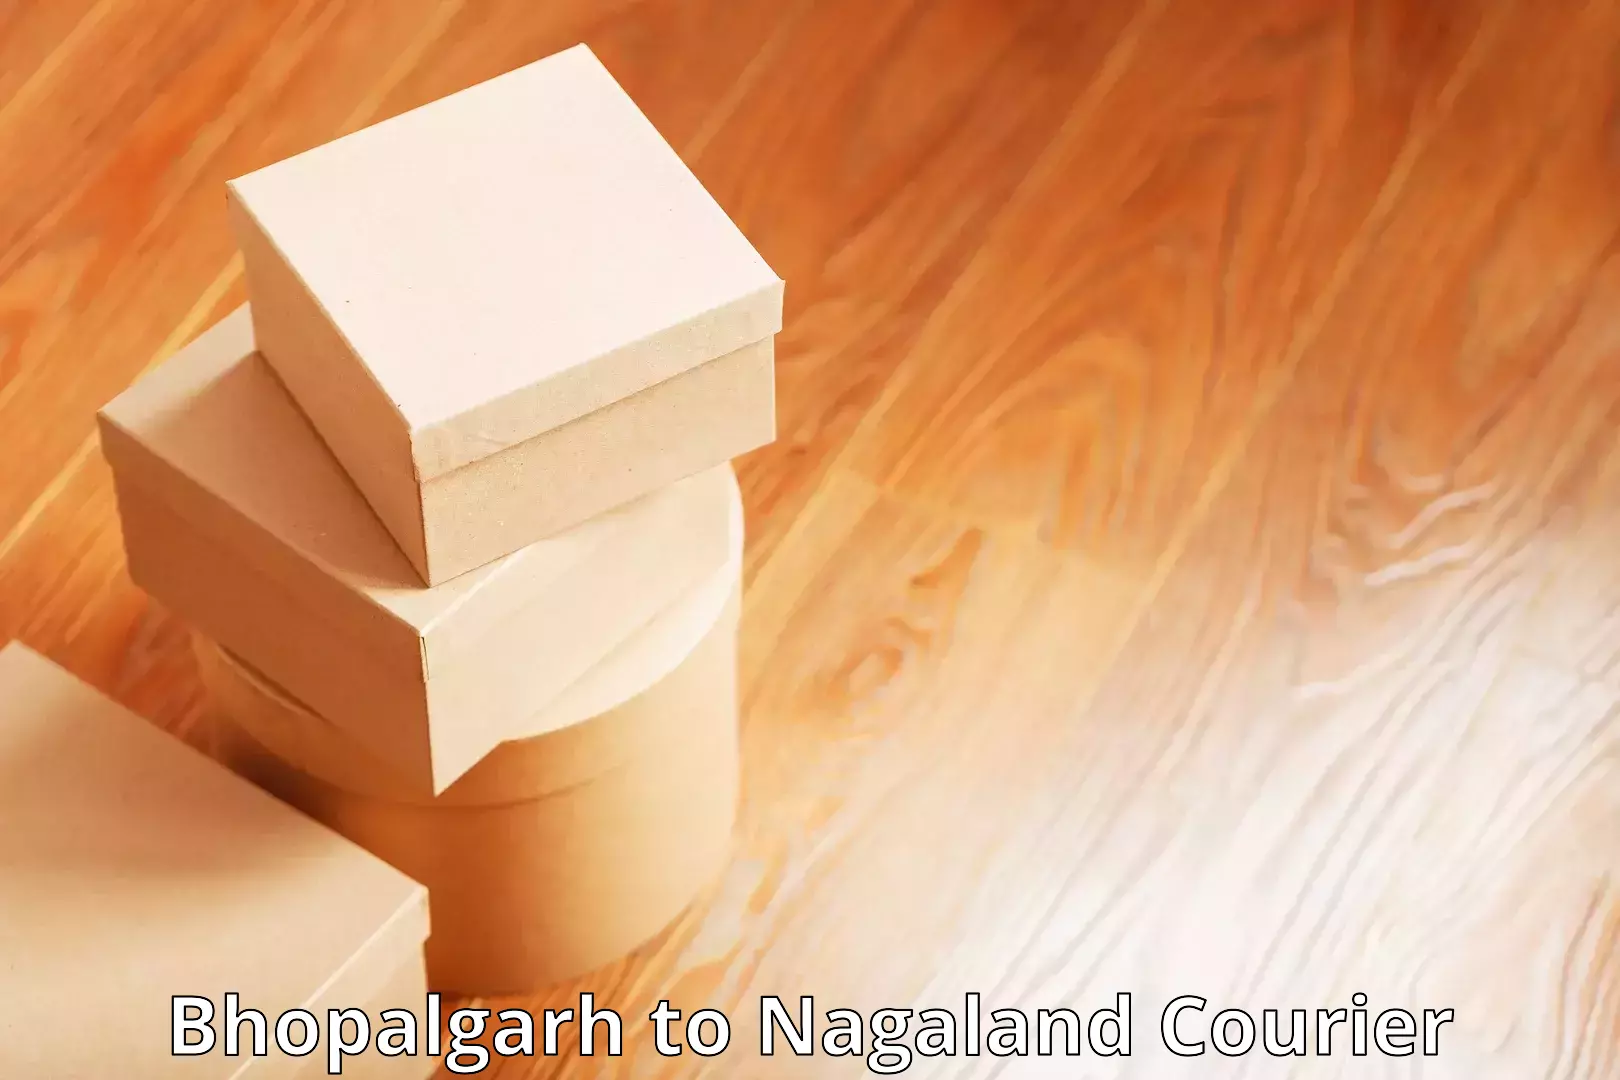 Express package services in Bhopalgarh to Nagaland